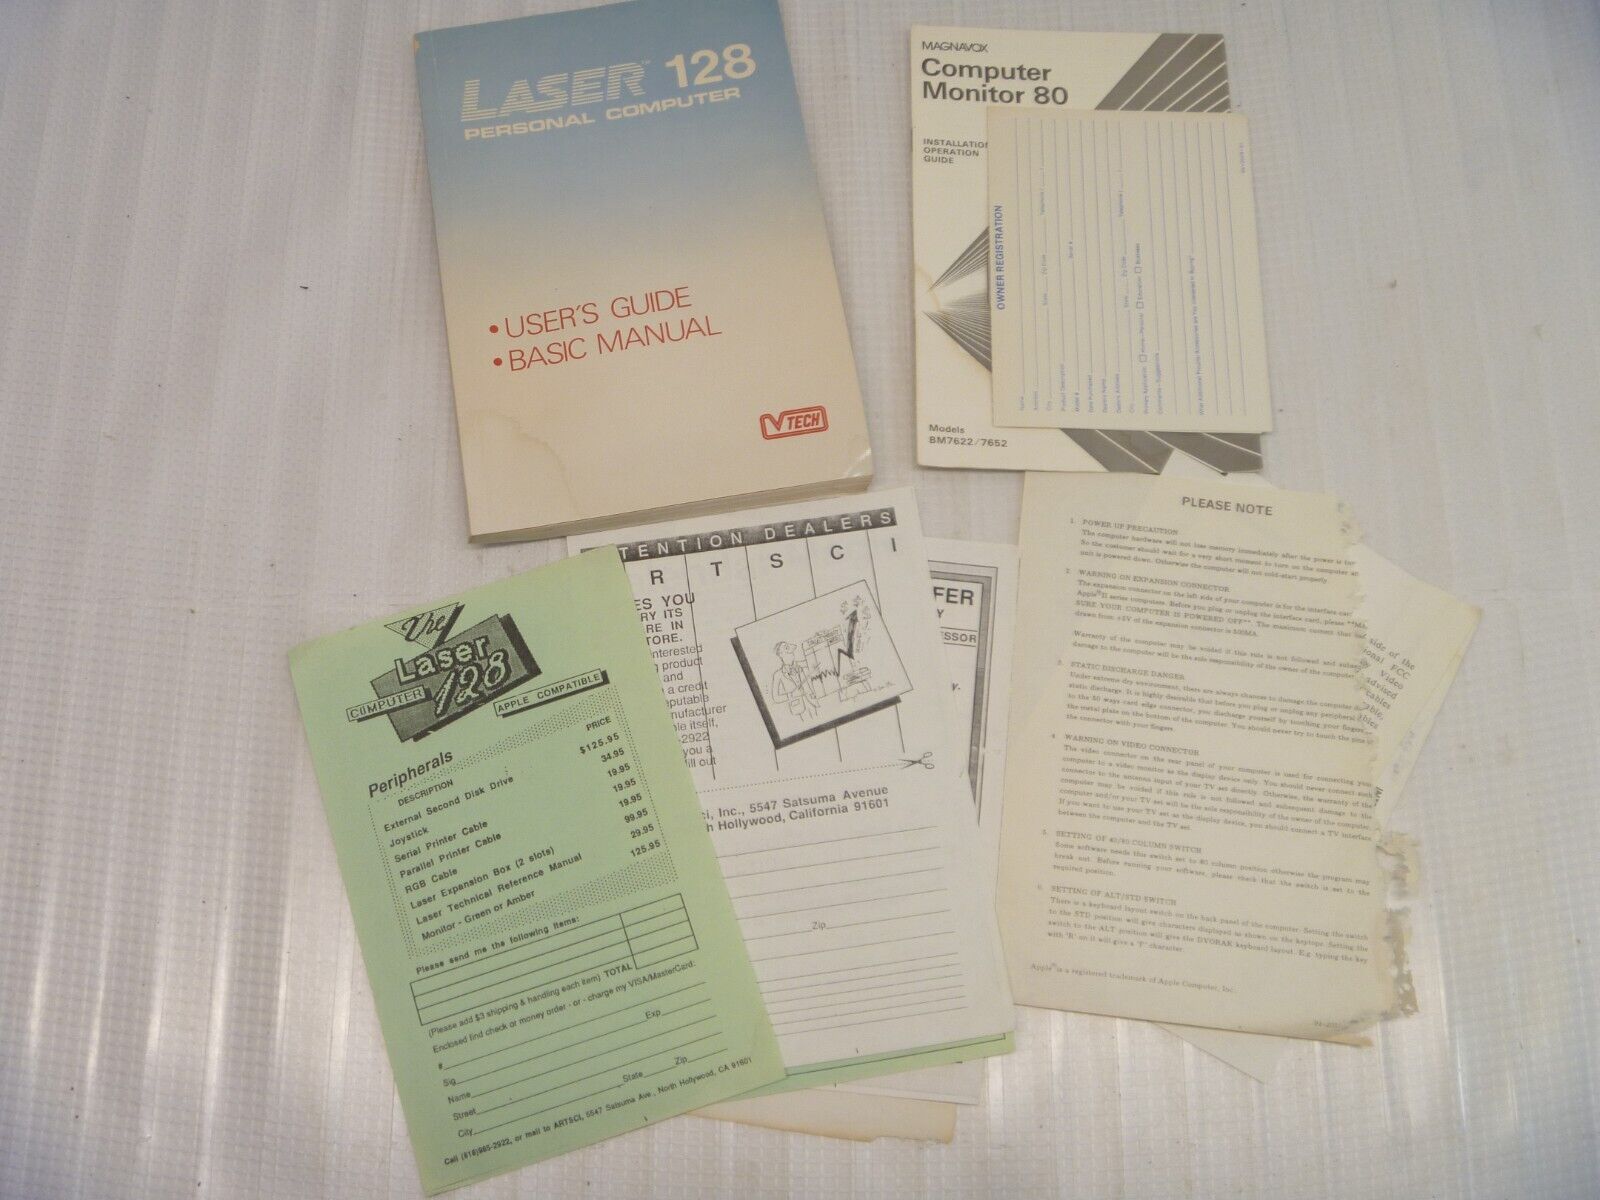 VINTAGE PC  1986 VTECH LASER 128 PERSONAL COMPUTER USER’S MANUAL APPLE II CLONE